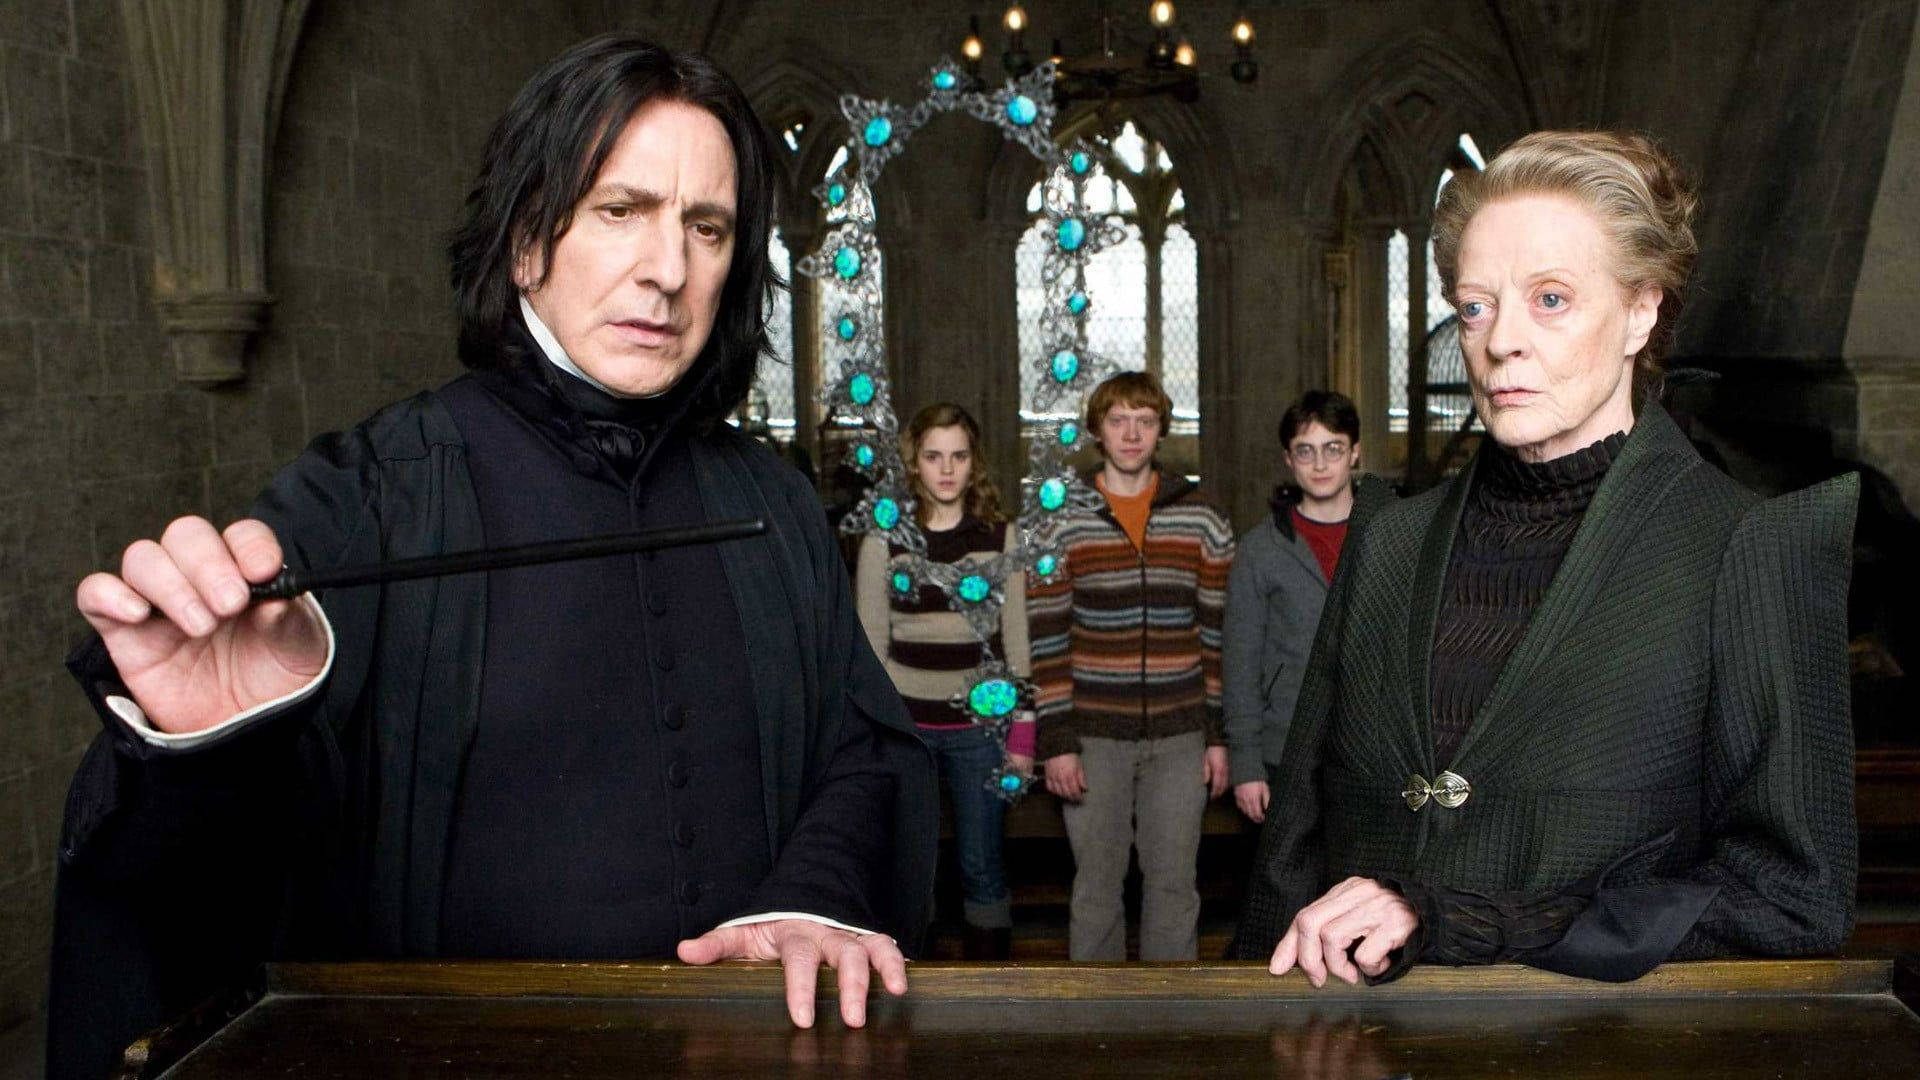 Ron Weasley, Professor McGonagall and Professor Snape stand together at Hogwarts. Wallpaper